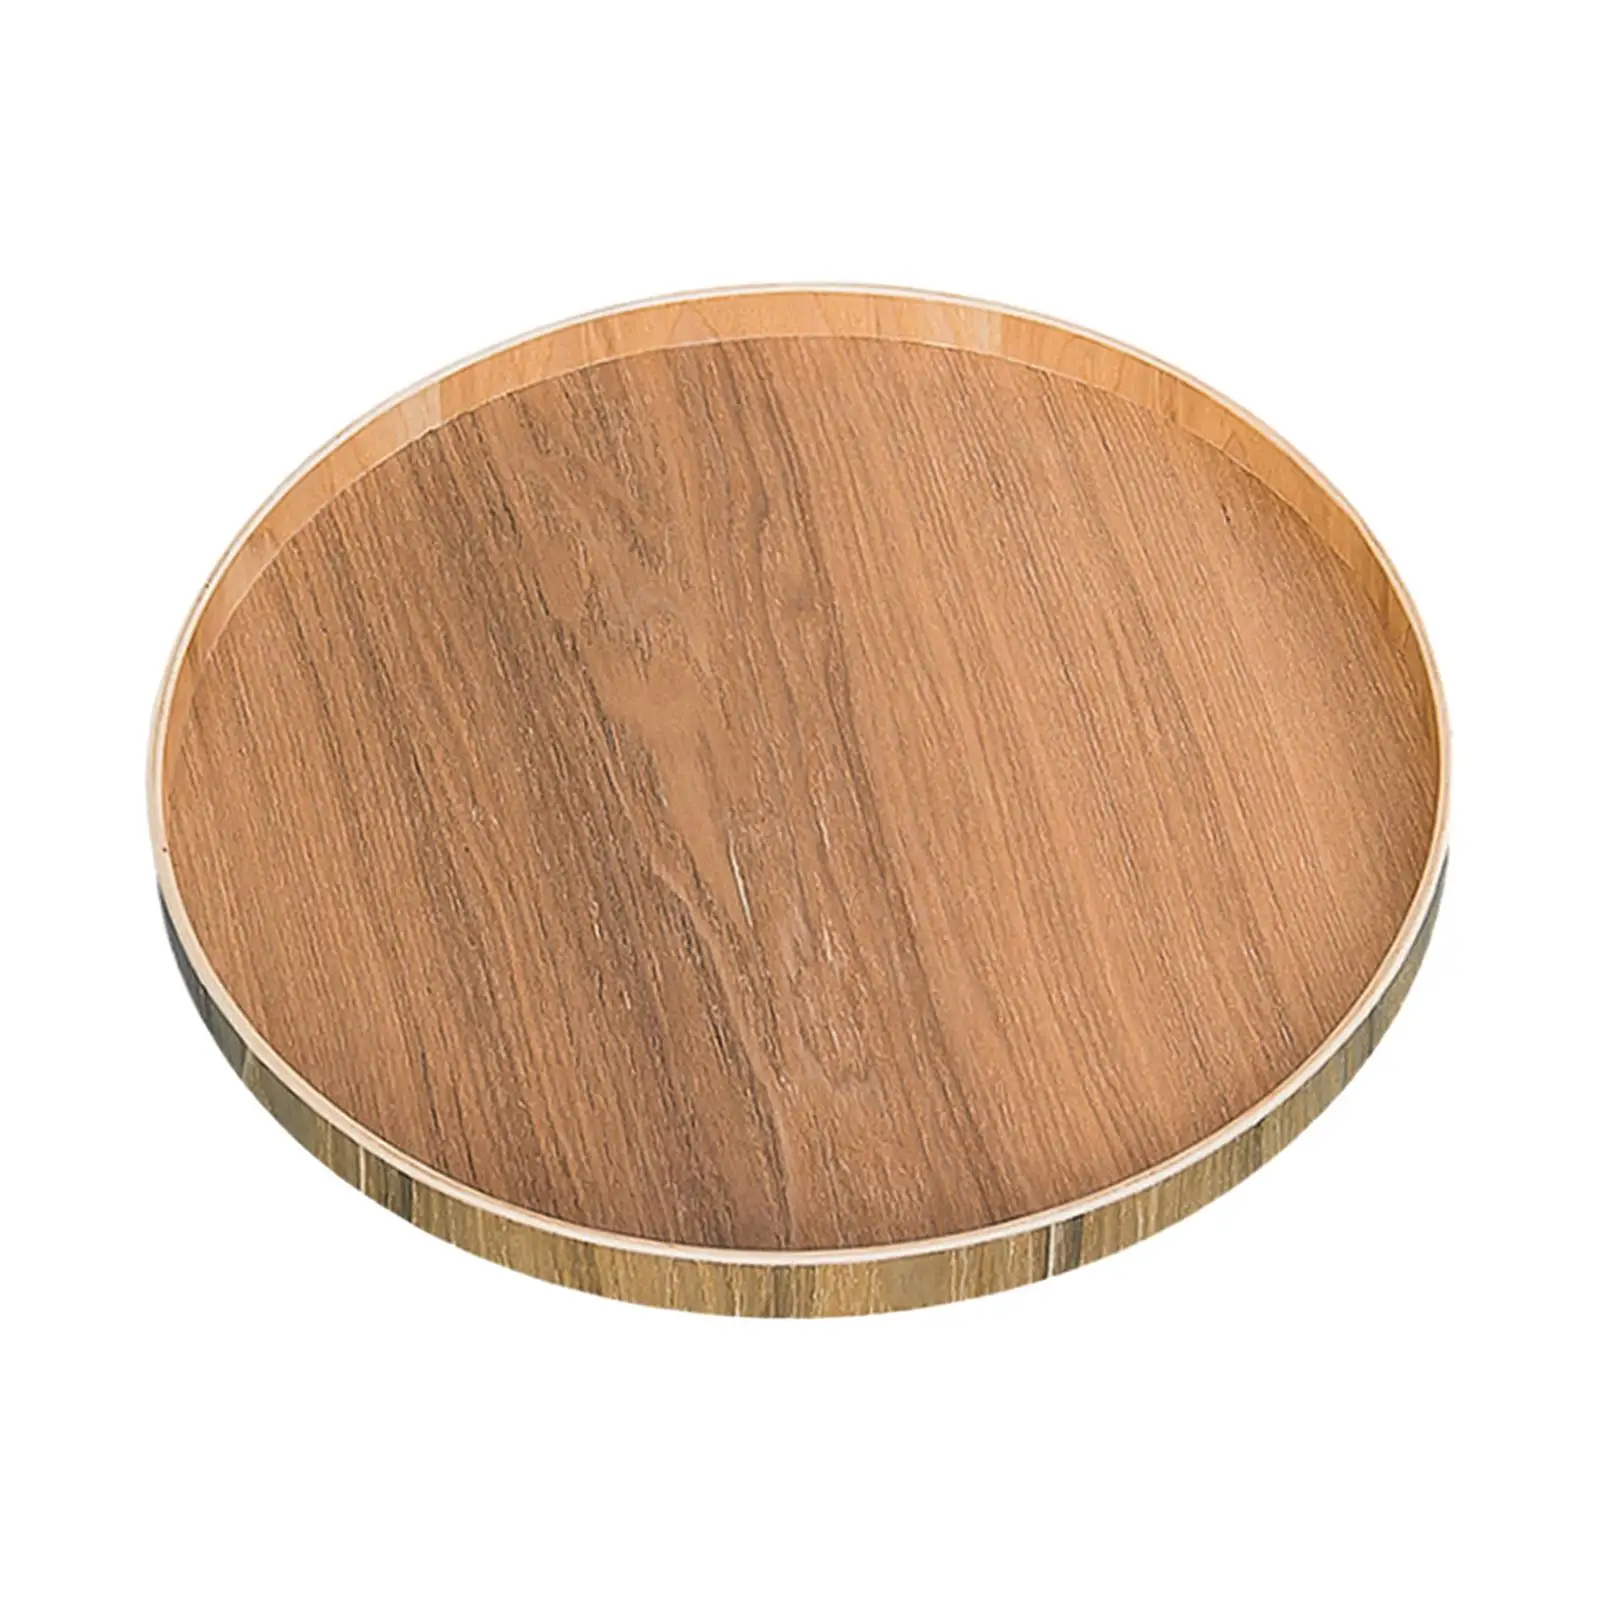 Wooden Serving Tray Multipurpose Farmhouse Decorative Tray Fruit Plate for Home Pantry Kitchen Countertop Bathroom Cabinet